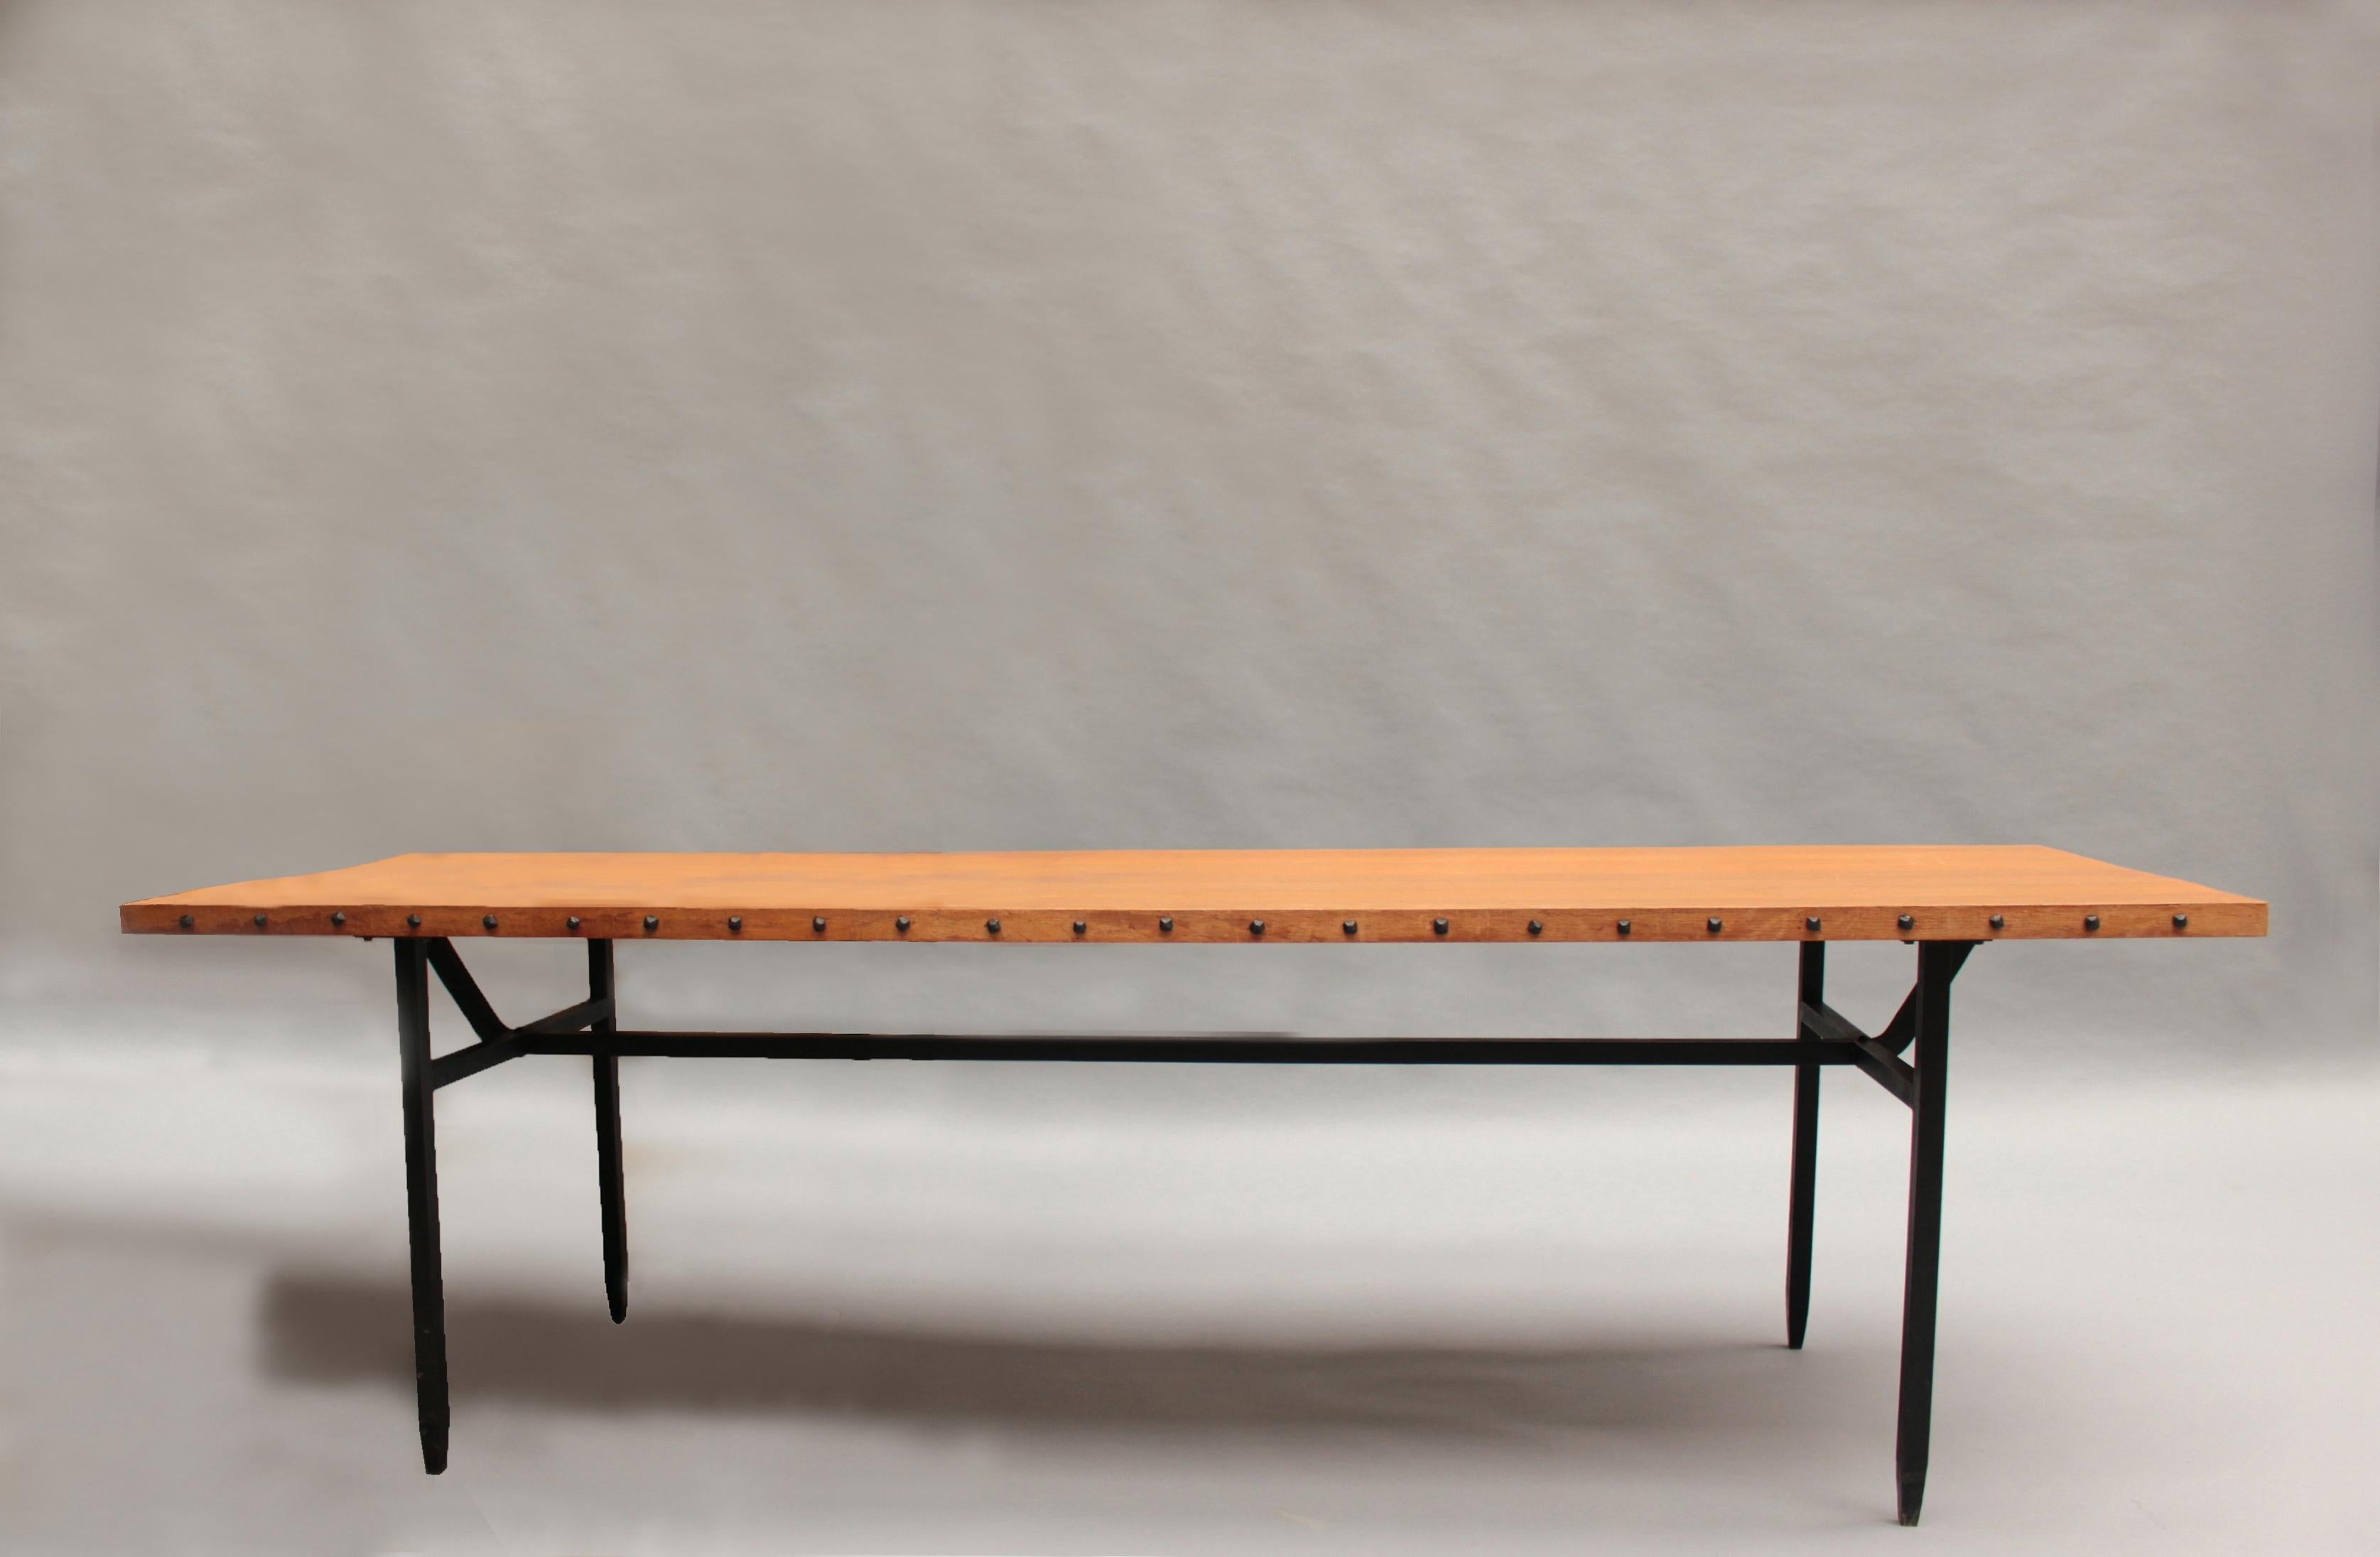 Jean Touret & the Artisans of Marolles - A fine mid-century rectangular dining table with a wrought iron base that supports a solid oak top adorned with wrought iron nails.